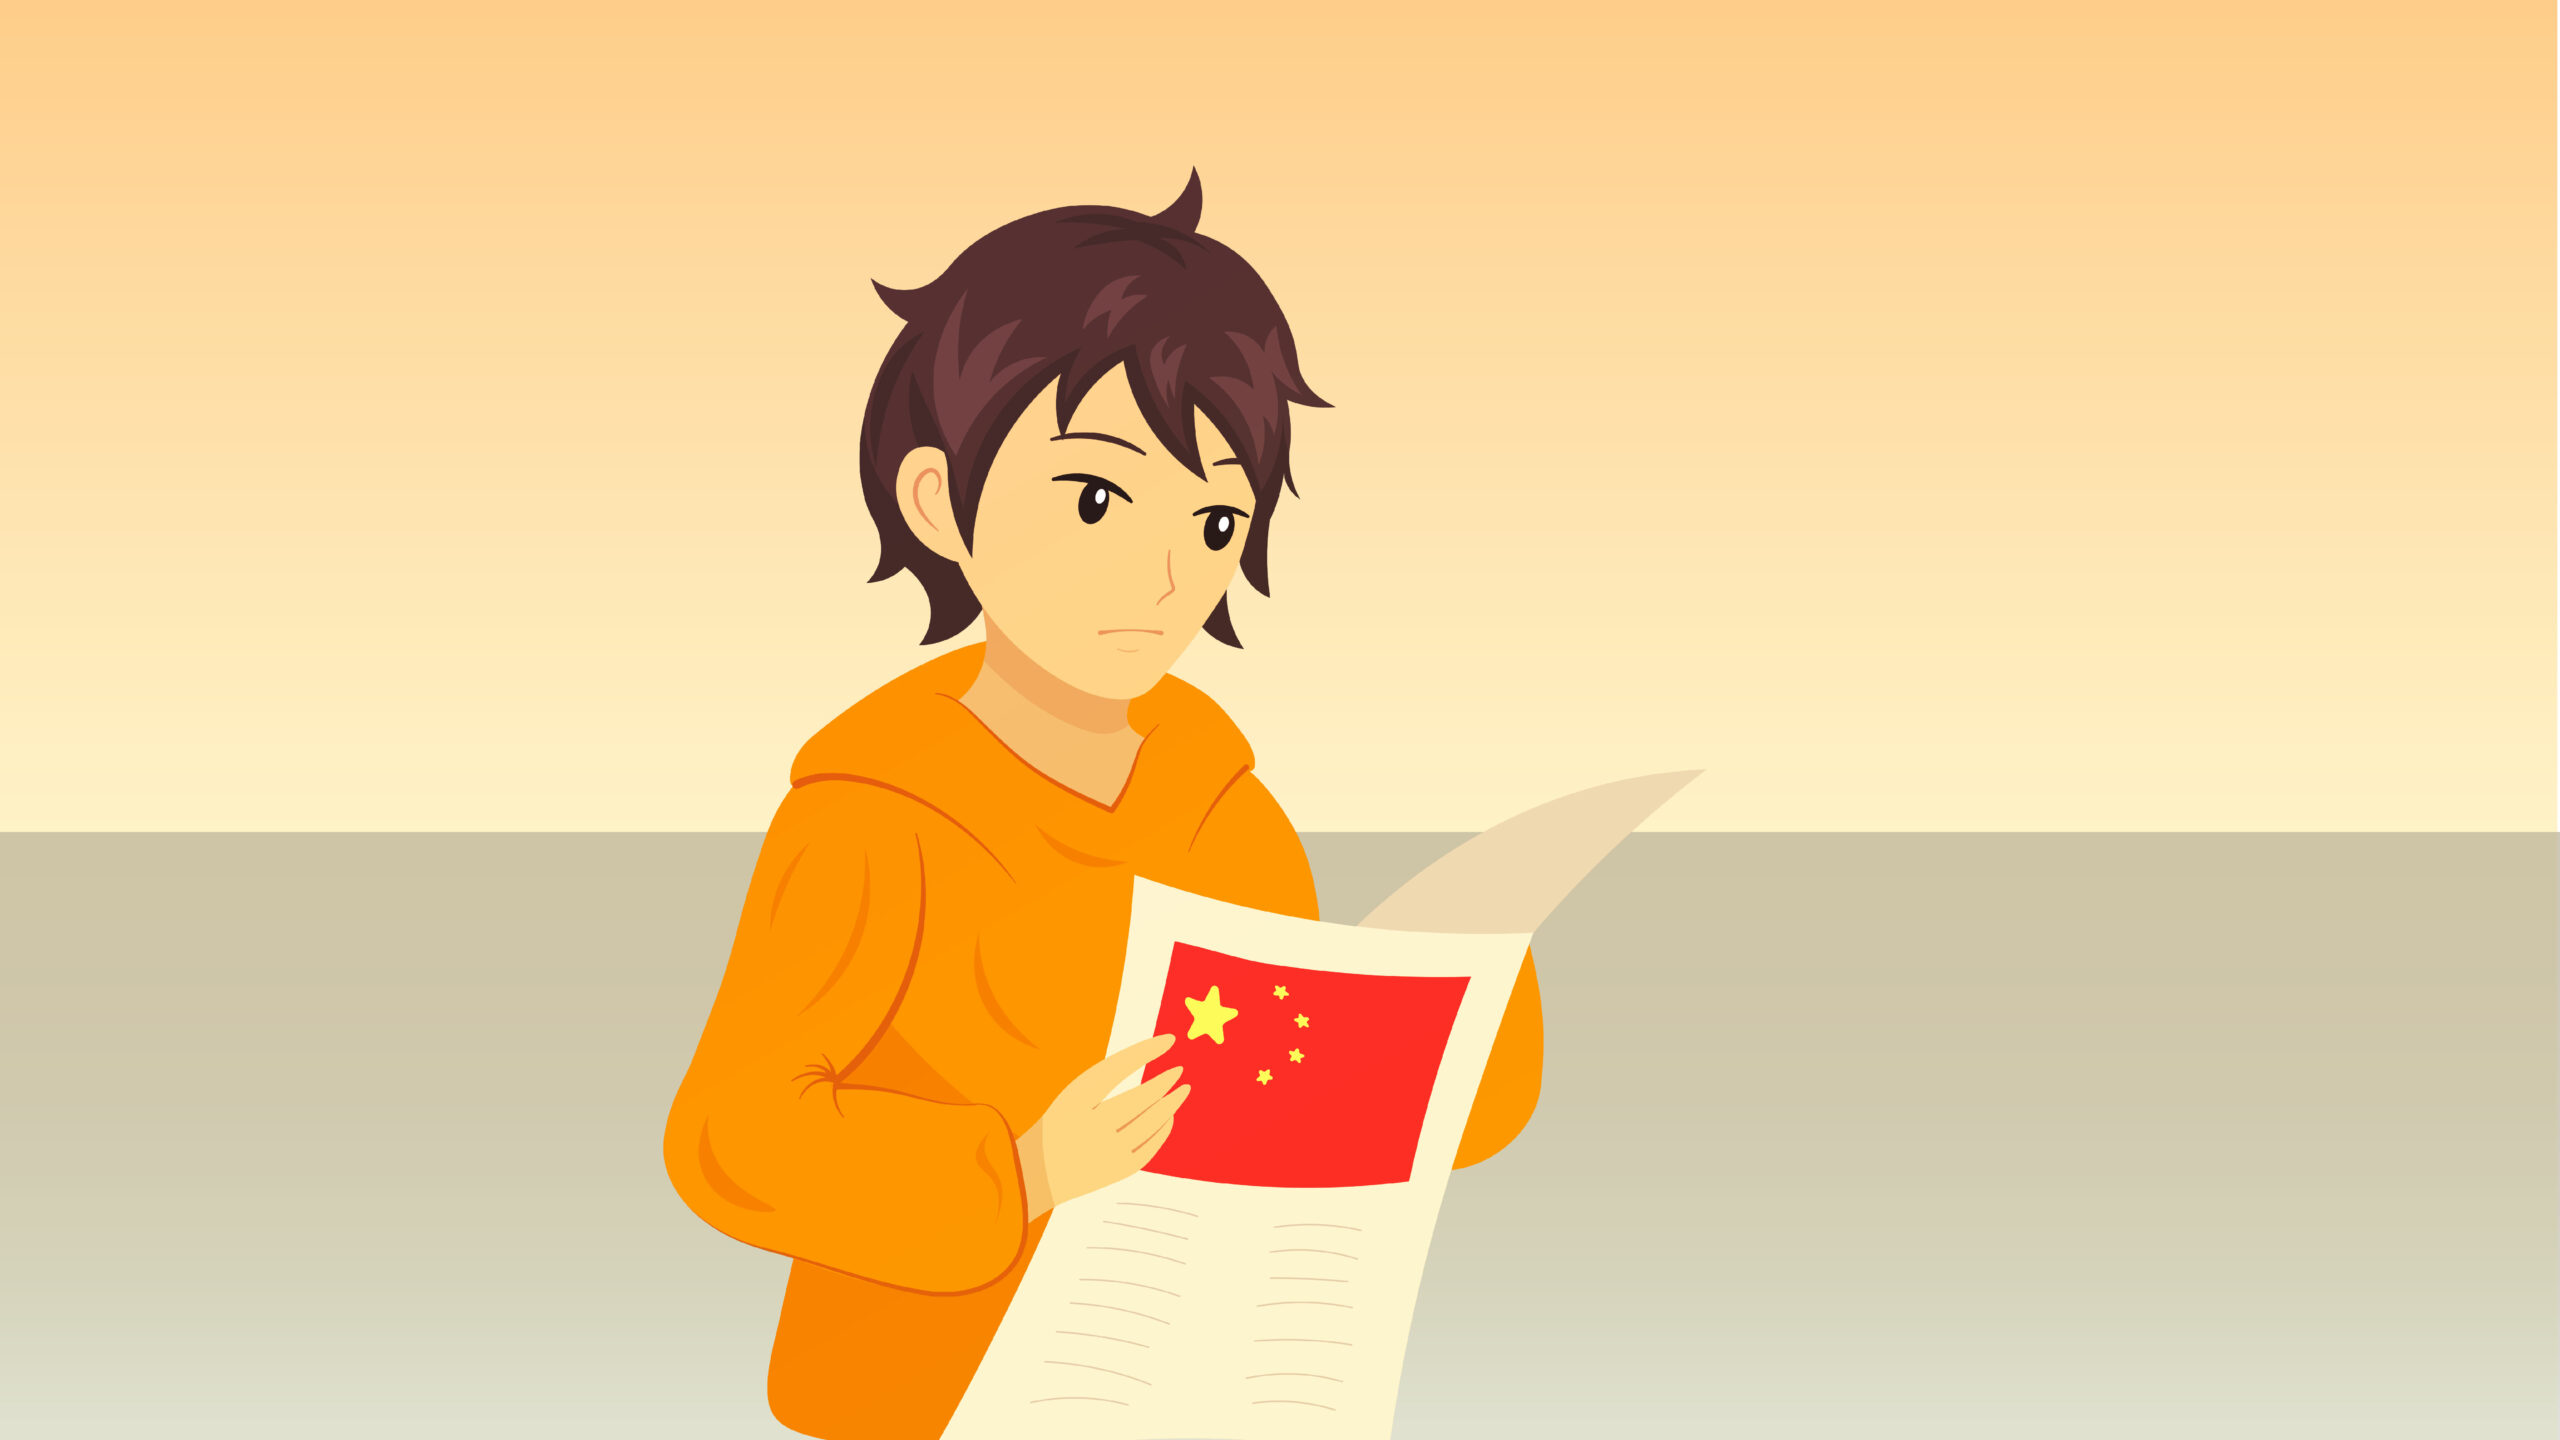 digital illustration of someone reading a newspaper with the Chinese flag on the front